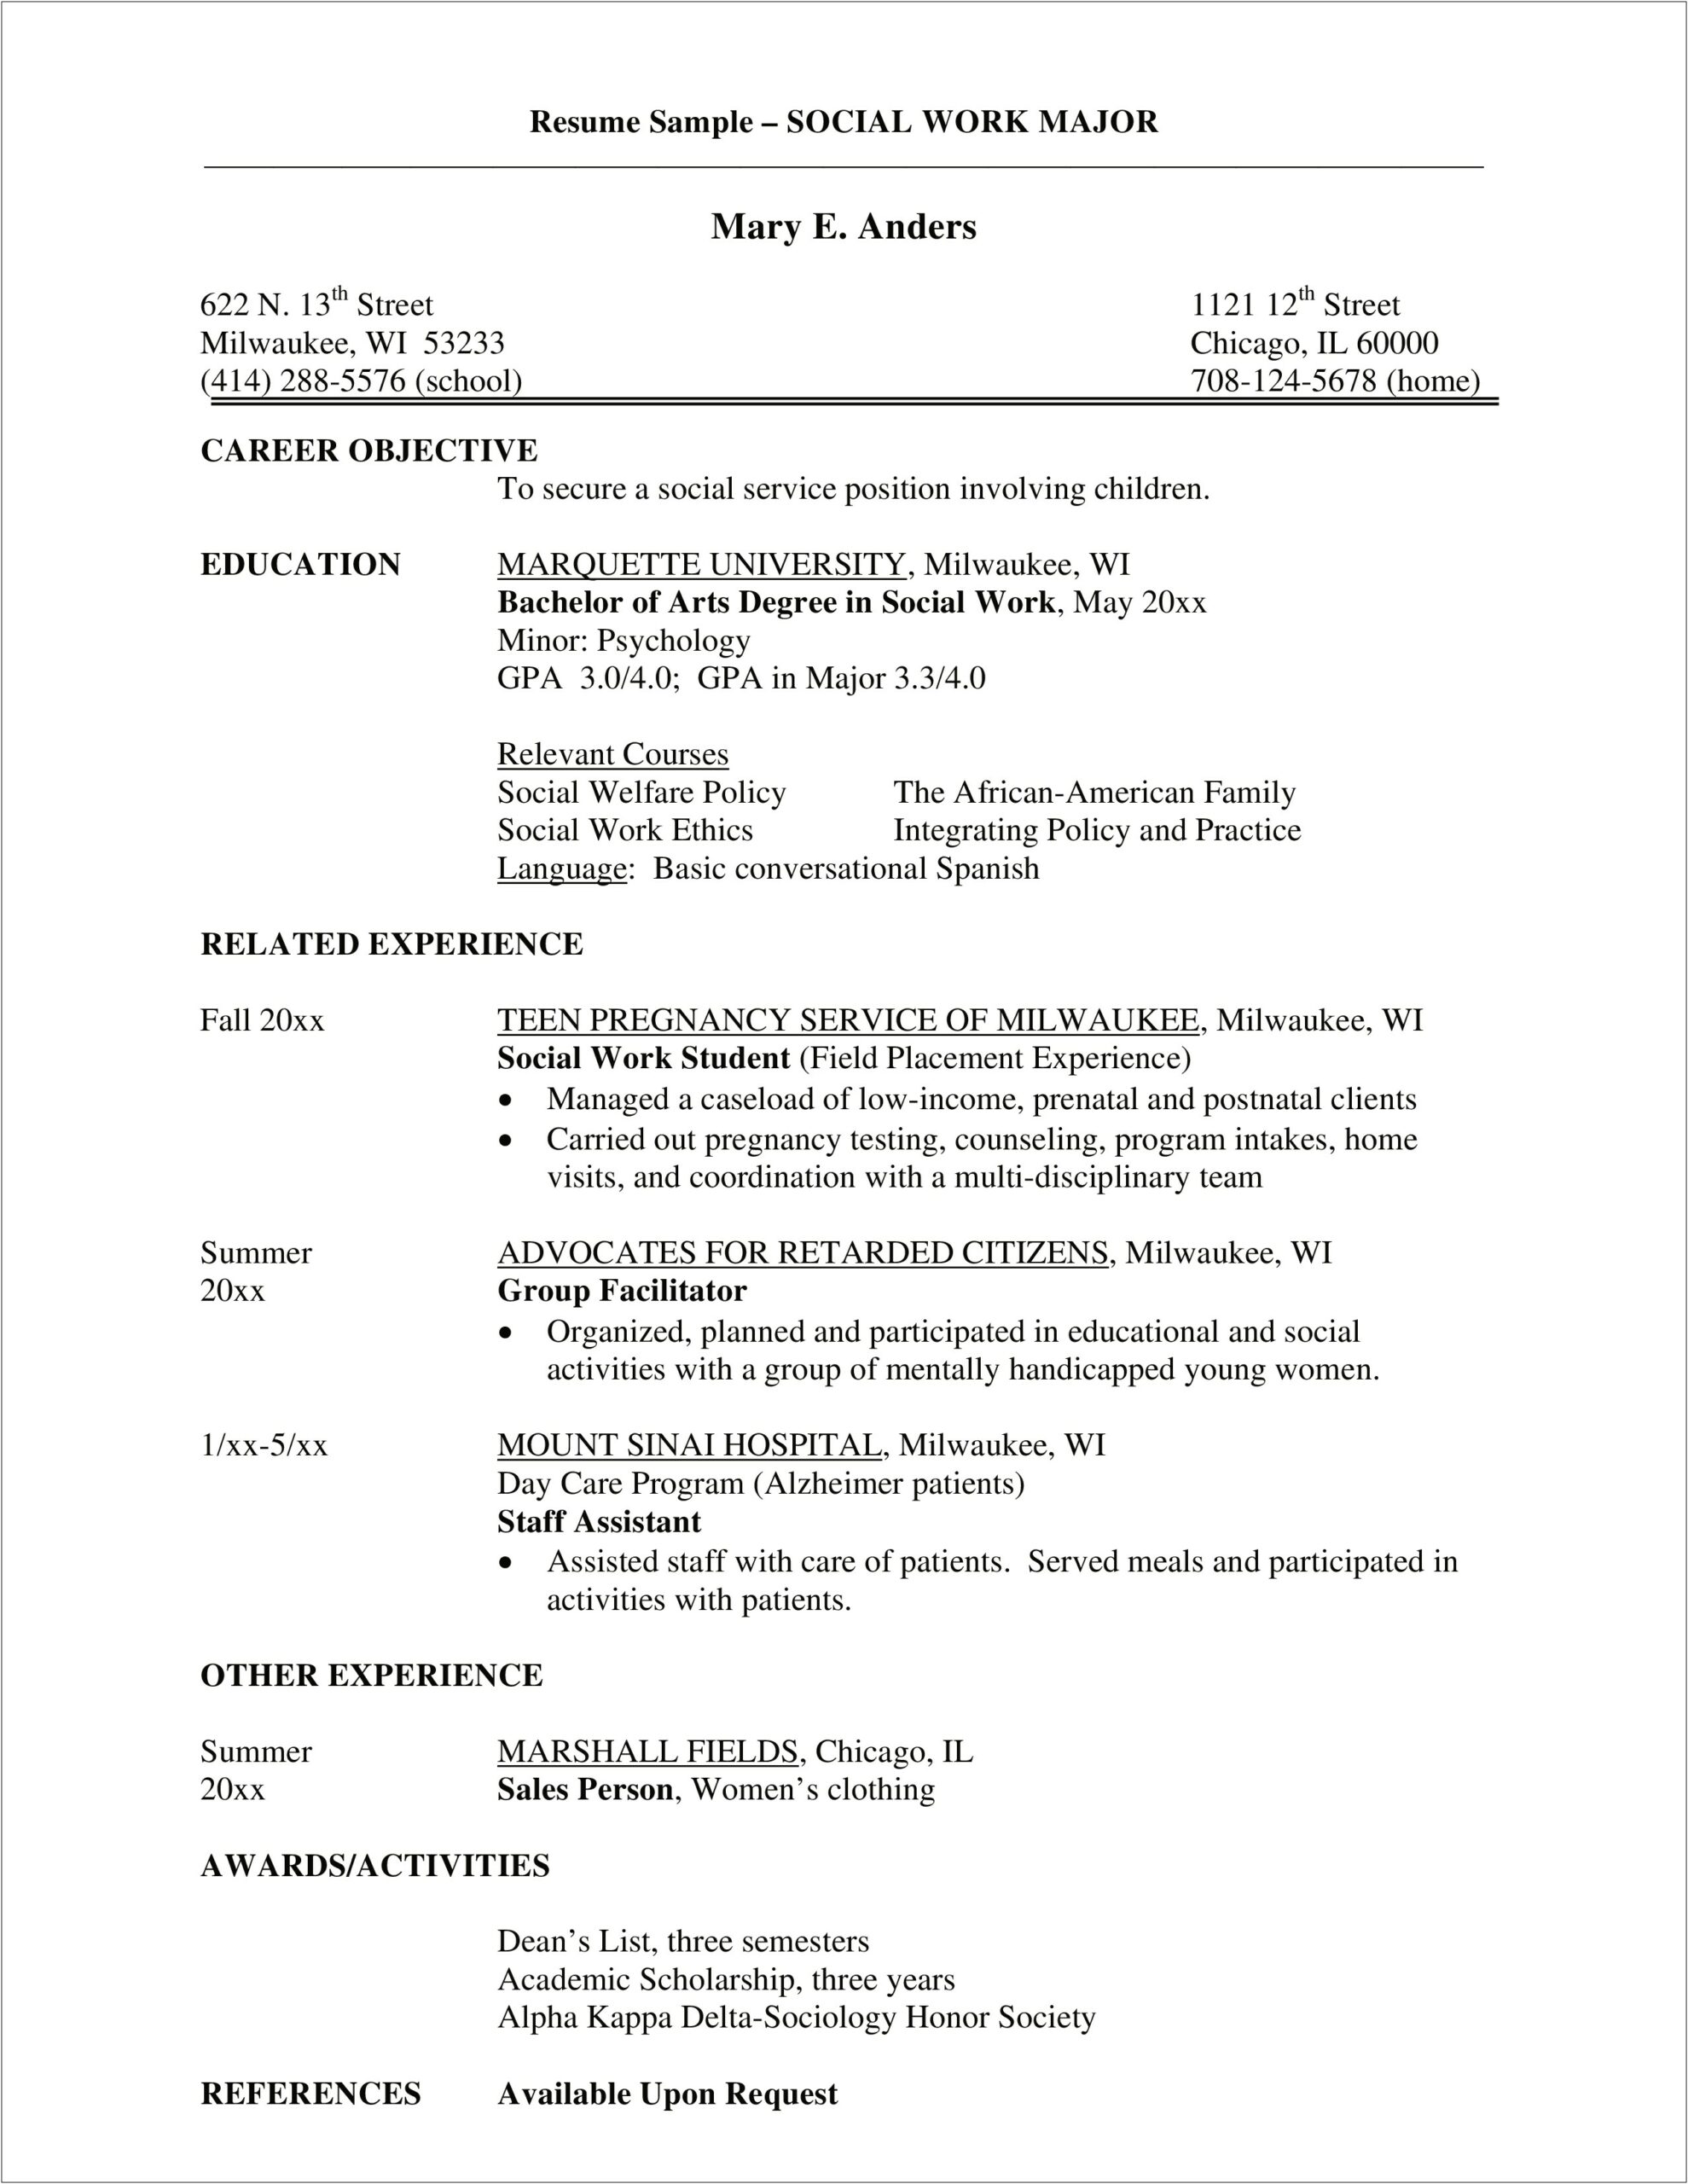 Sample Resume Objectives For Social Services